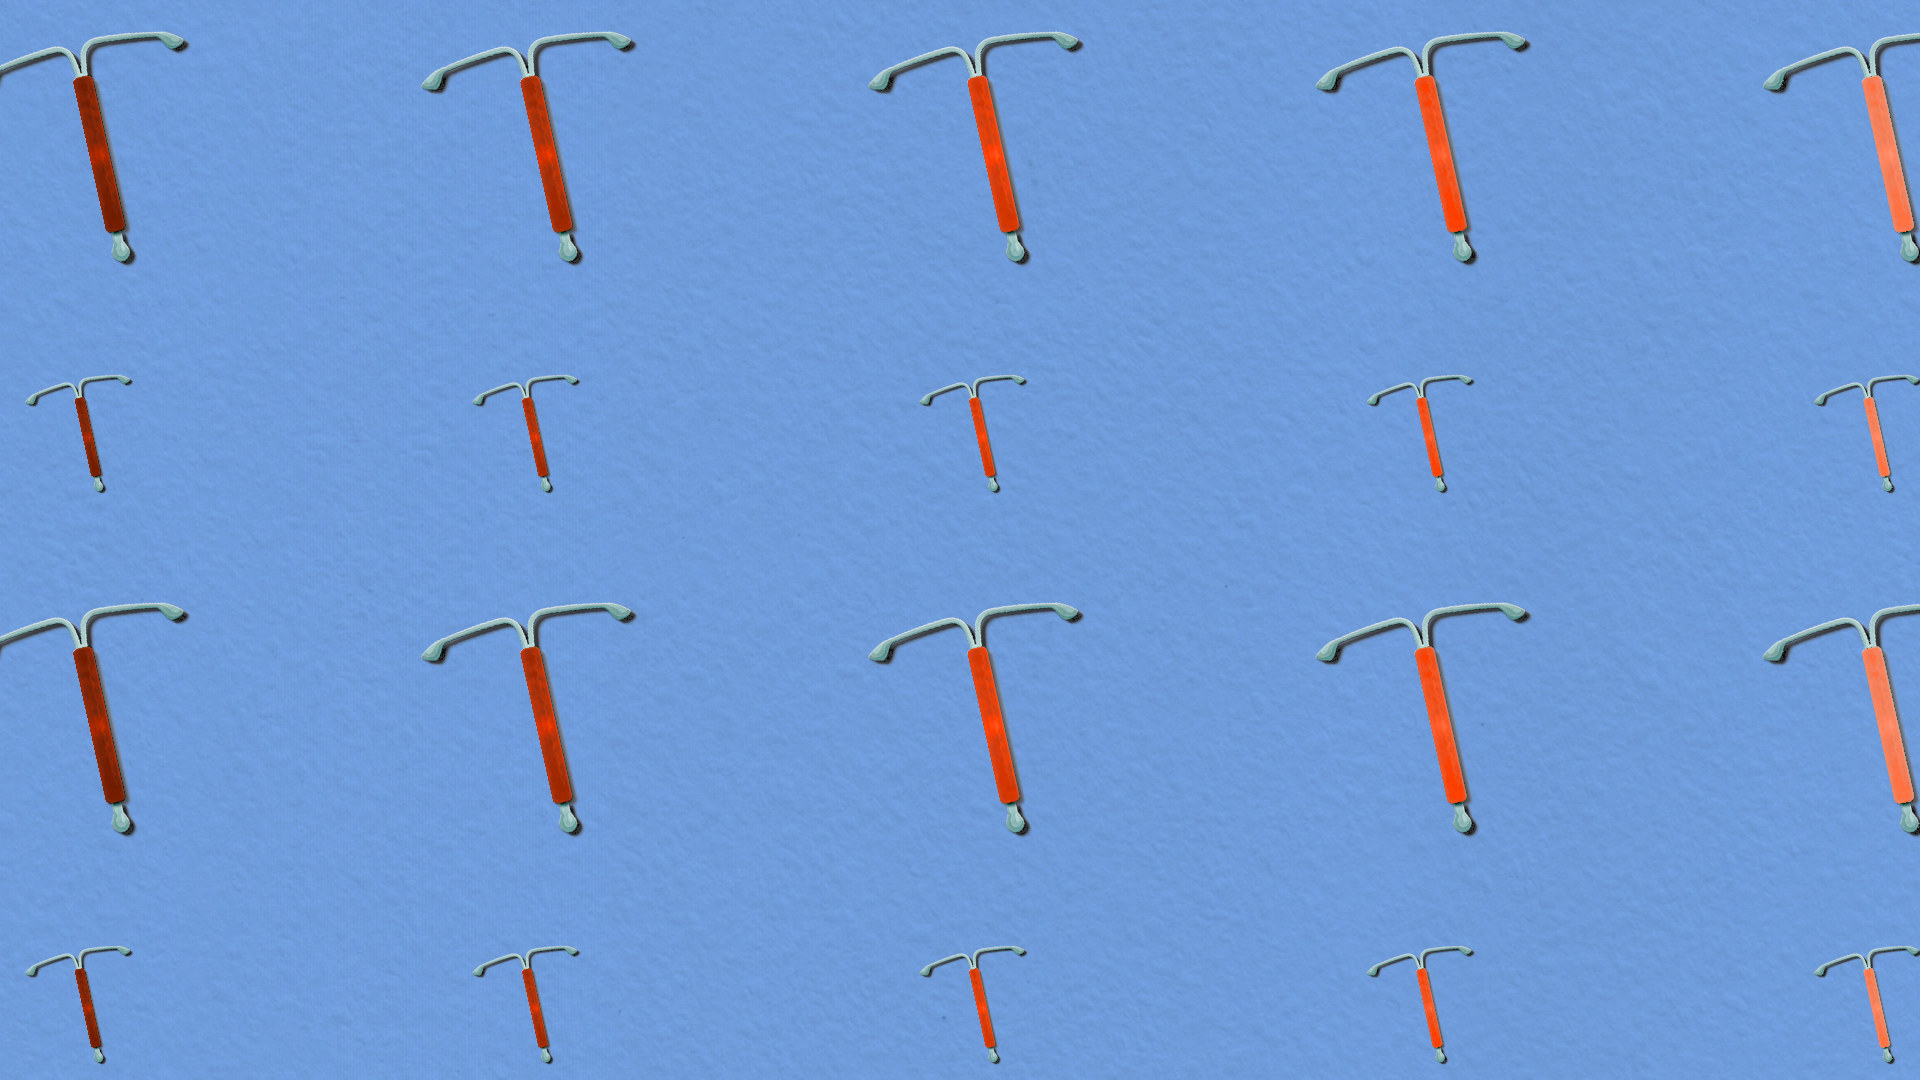 a grid of IUDs in different colors of red and orange